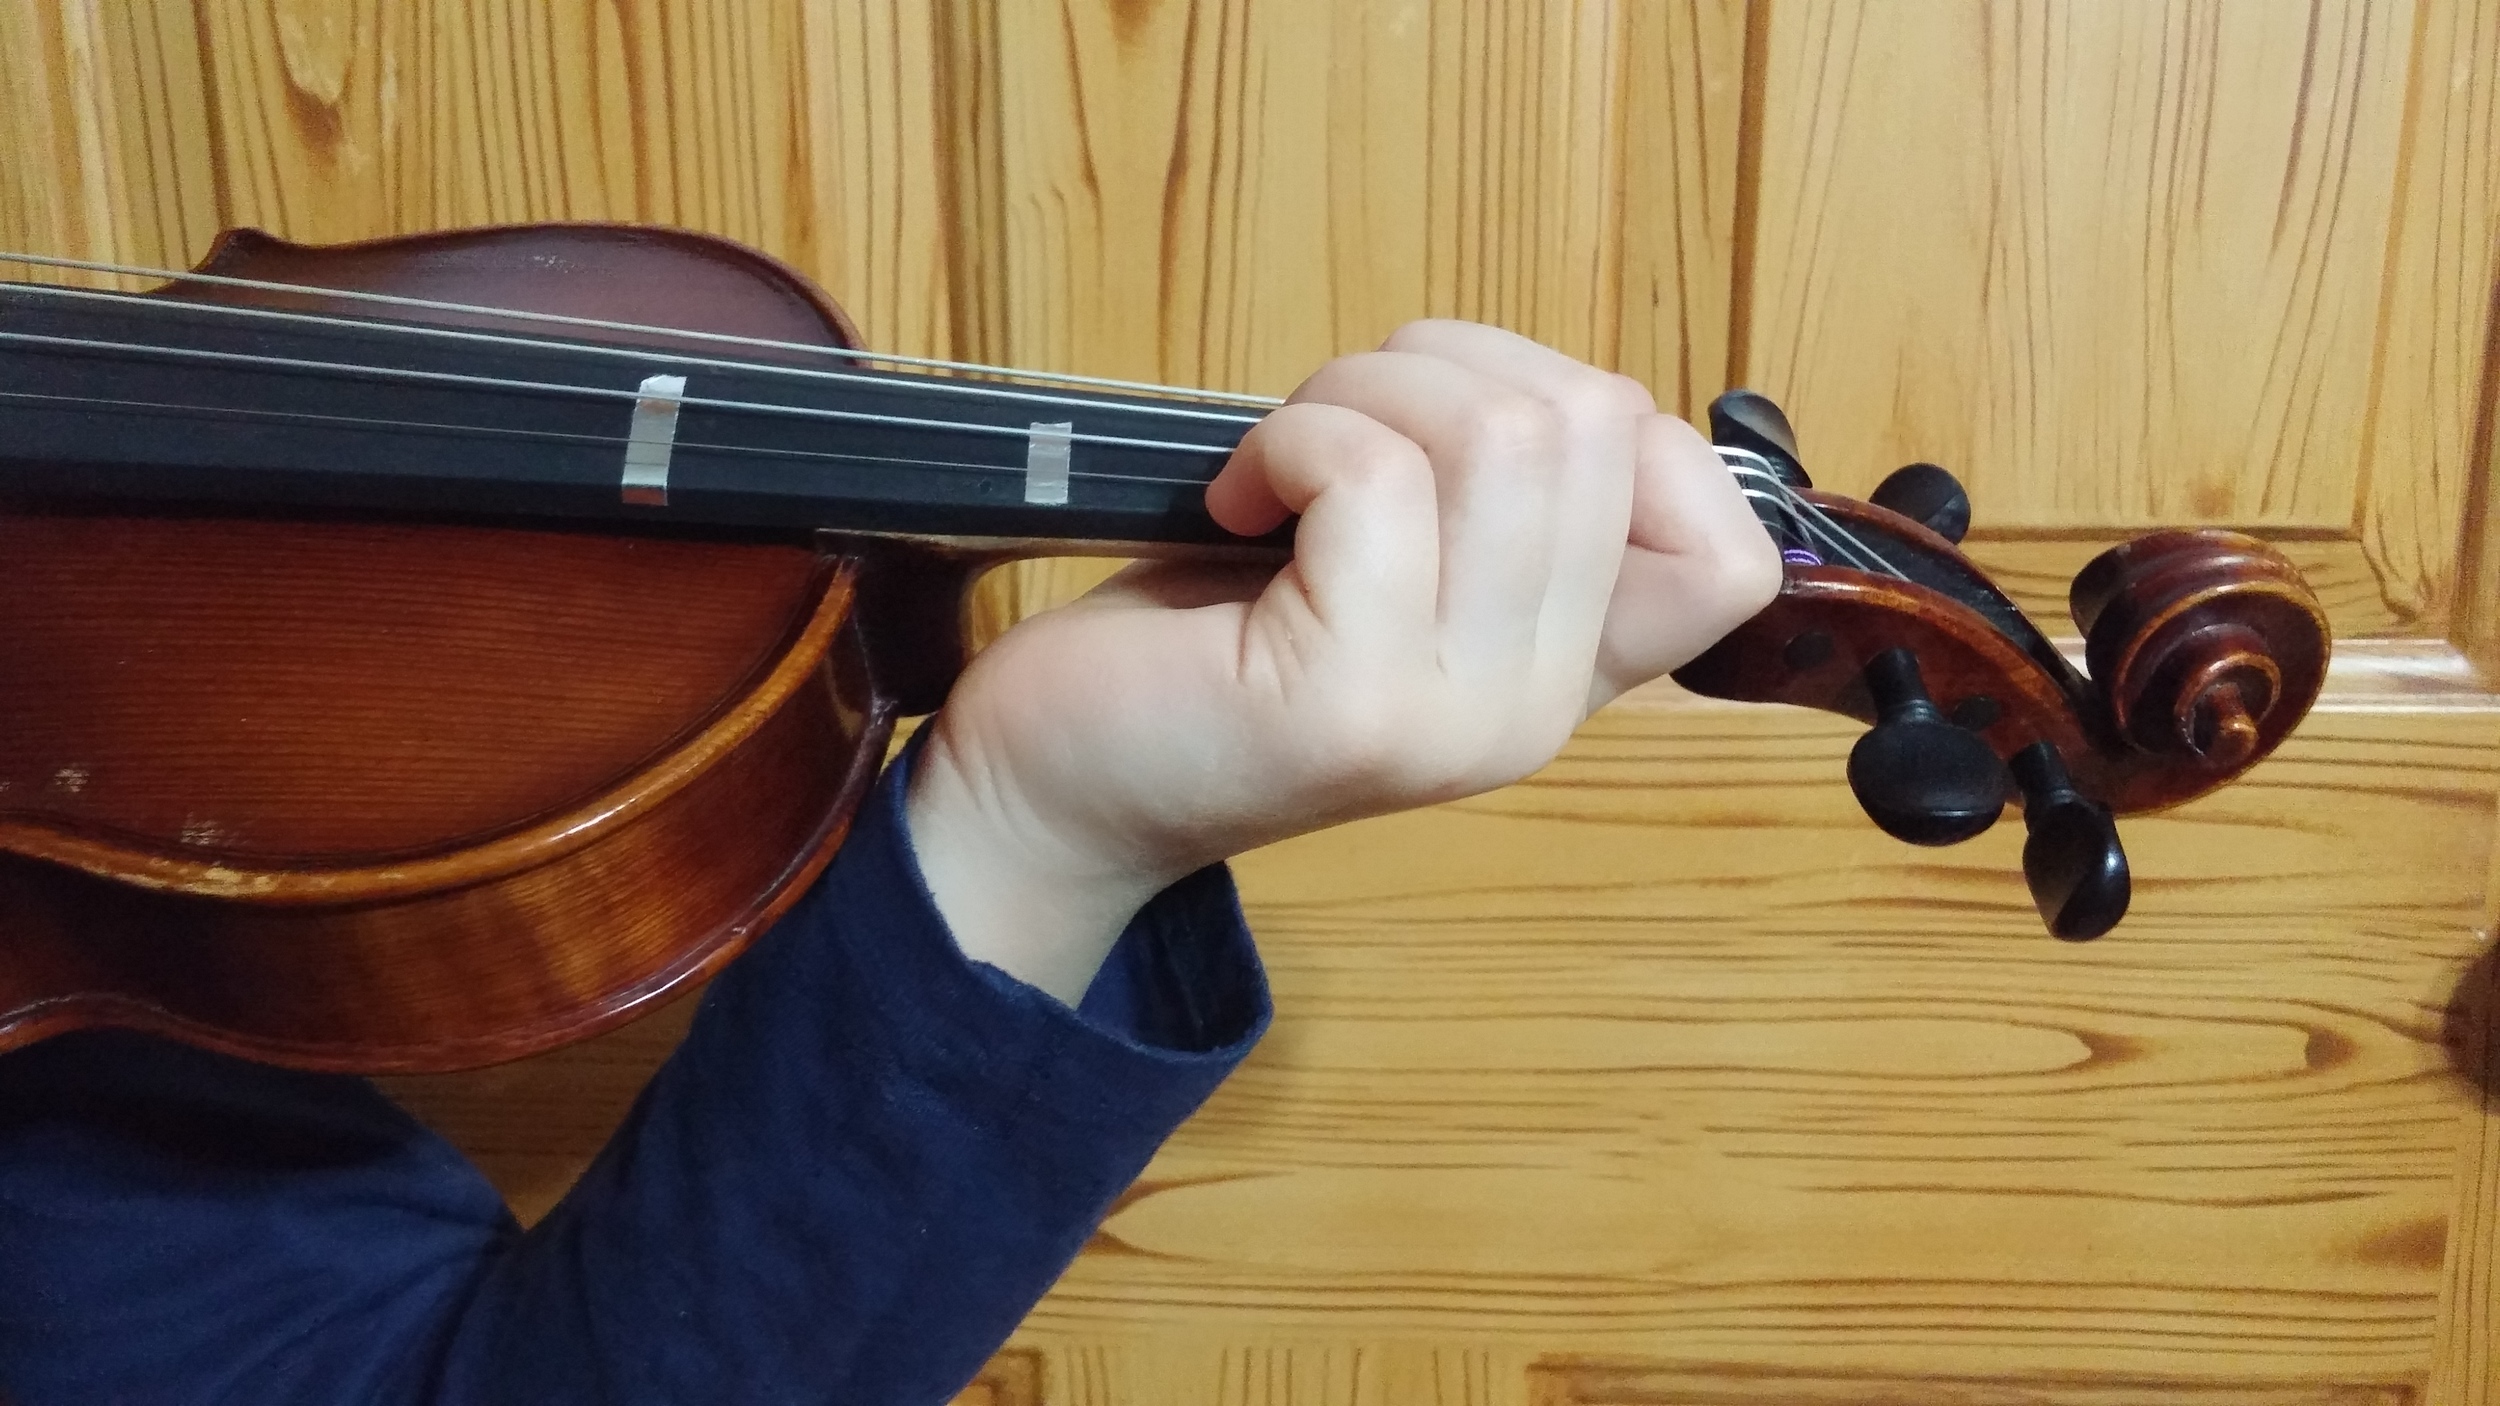 Spinnenerlied n/ Rubinstein Violin скрипка. Fiddling with fingers. The hand of the Violinist (1912). Занятия на скрипке